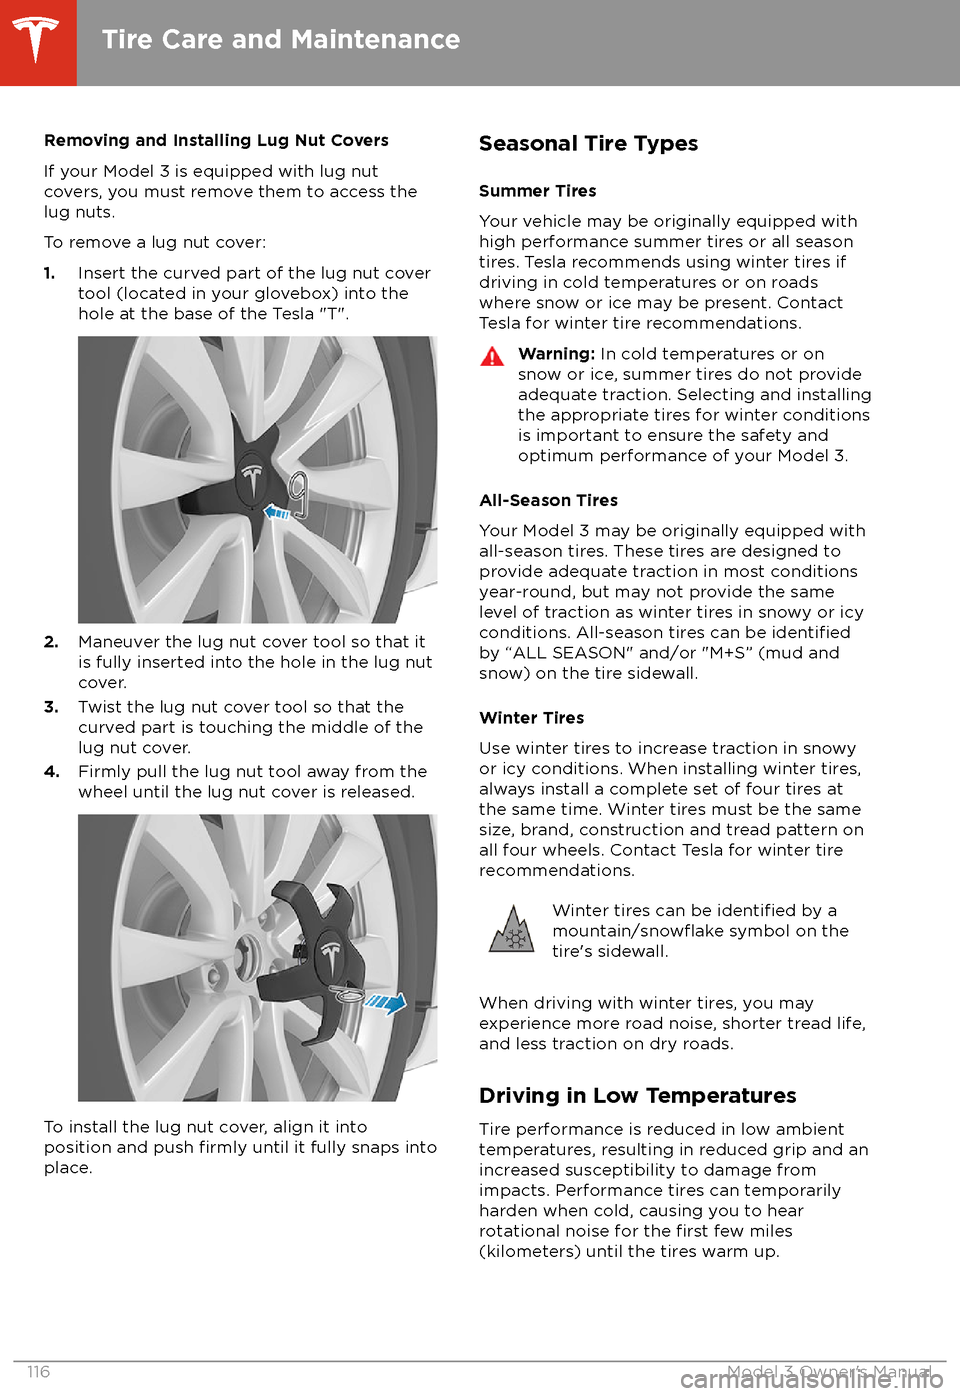 TESLA MODEL 3 2018  Owners Manual Removing and Installing Lug Nut Covers
If your Model 3 is equipped with lug nut covers, you must remove them to access the
lug nuts.
To remove a lug nut cover:
1. Insert the curved part of the lug nut